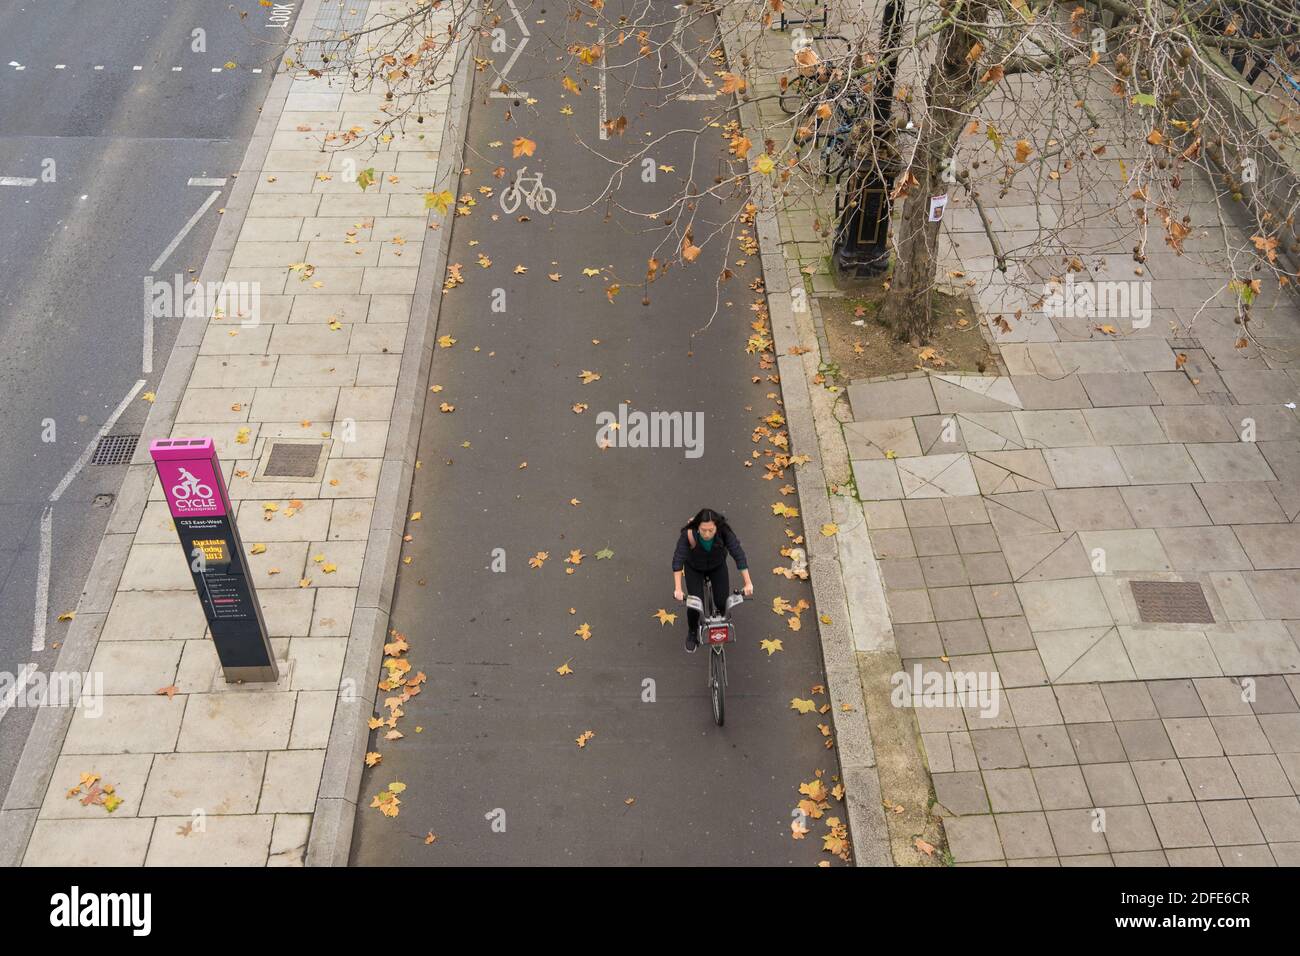 Victoria Embankment segregated cycle lane viewed from above with a moving cyclist riding through the fallen leaves on the road. London Stock Photo